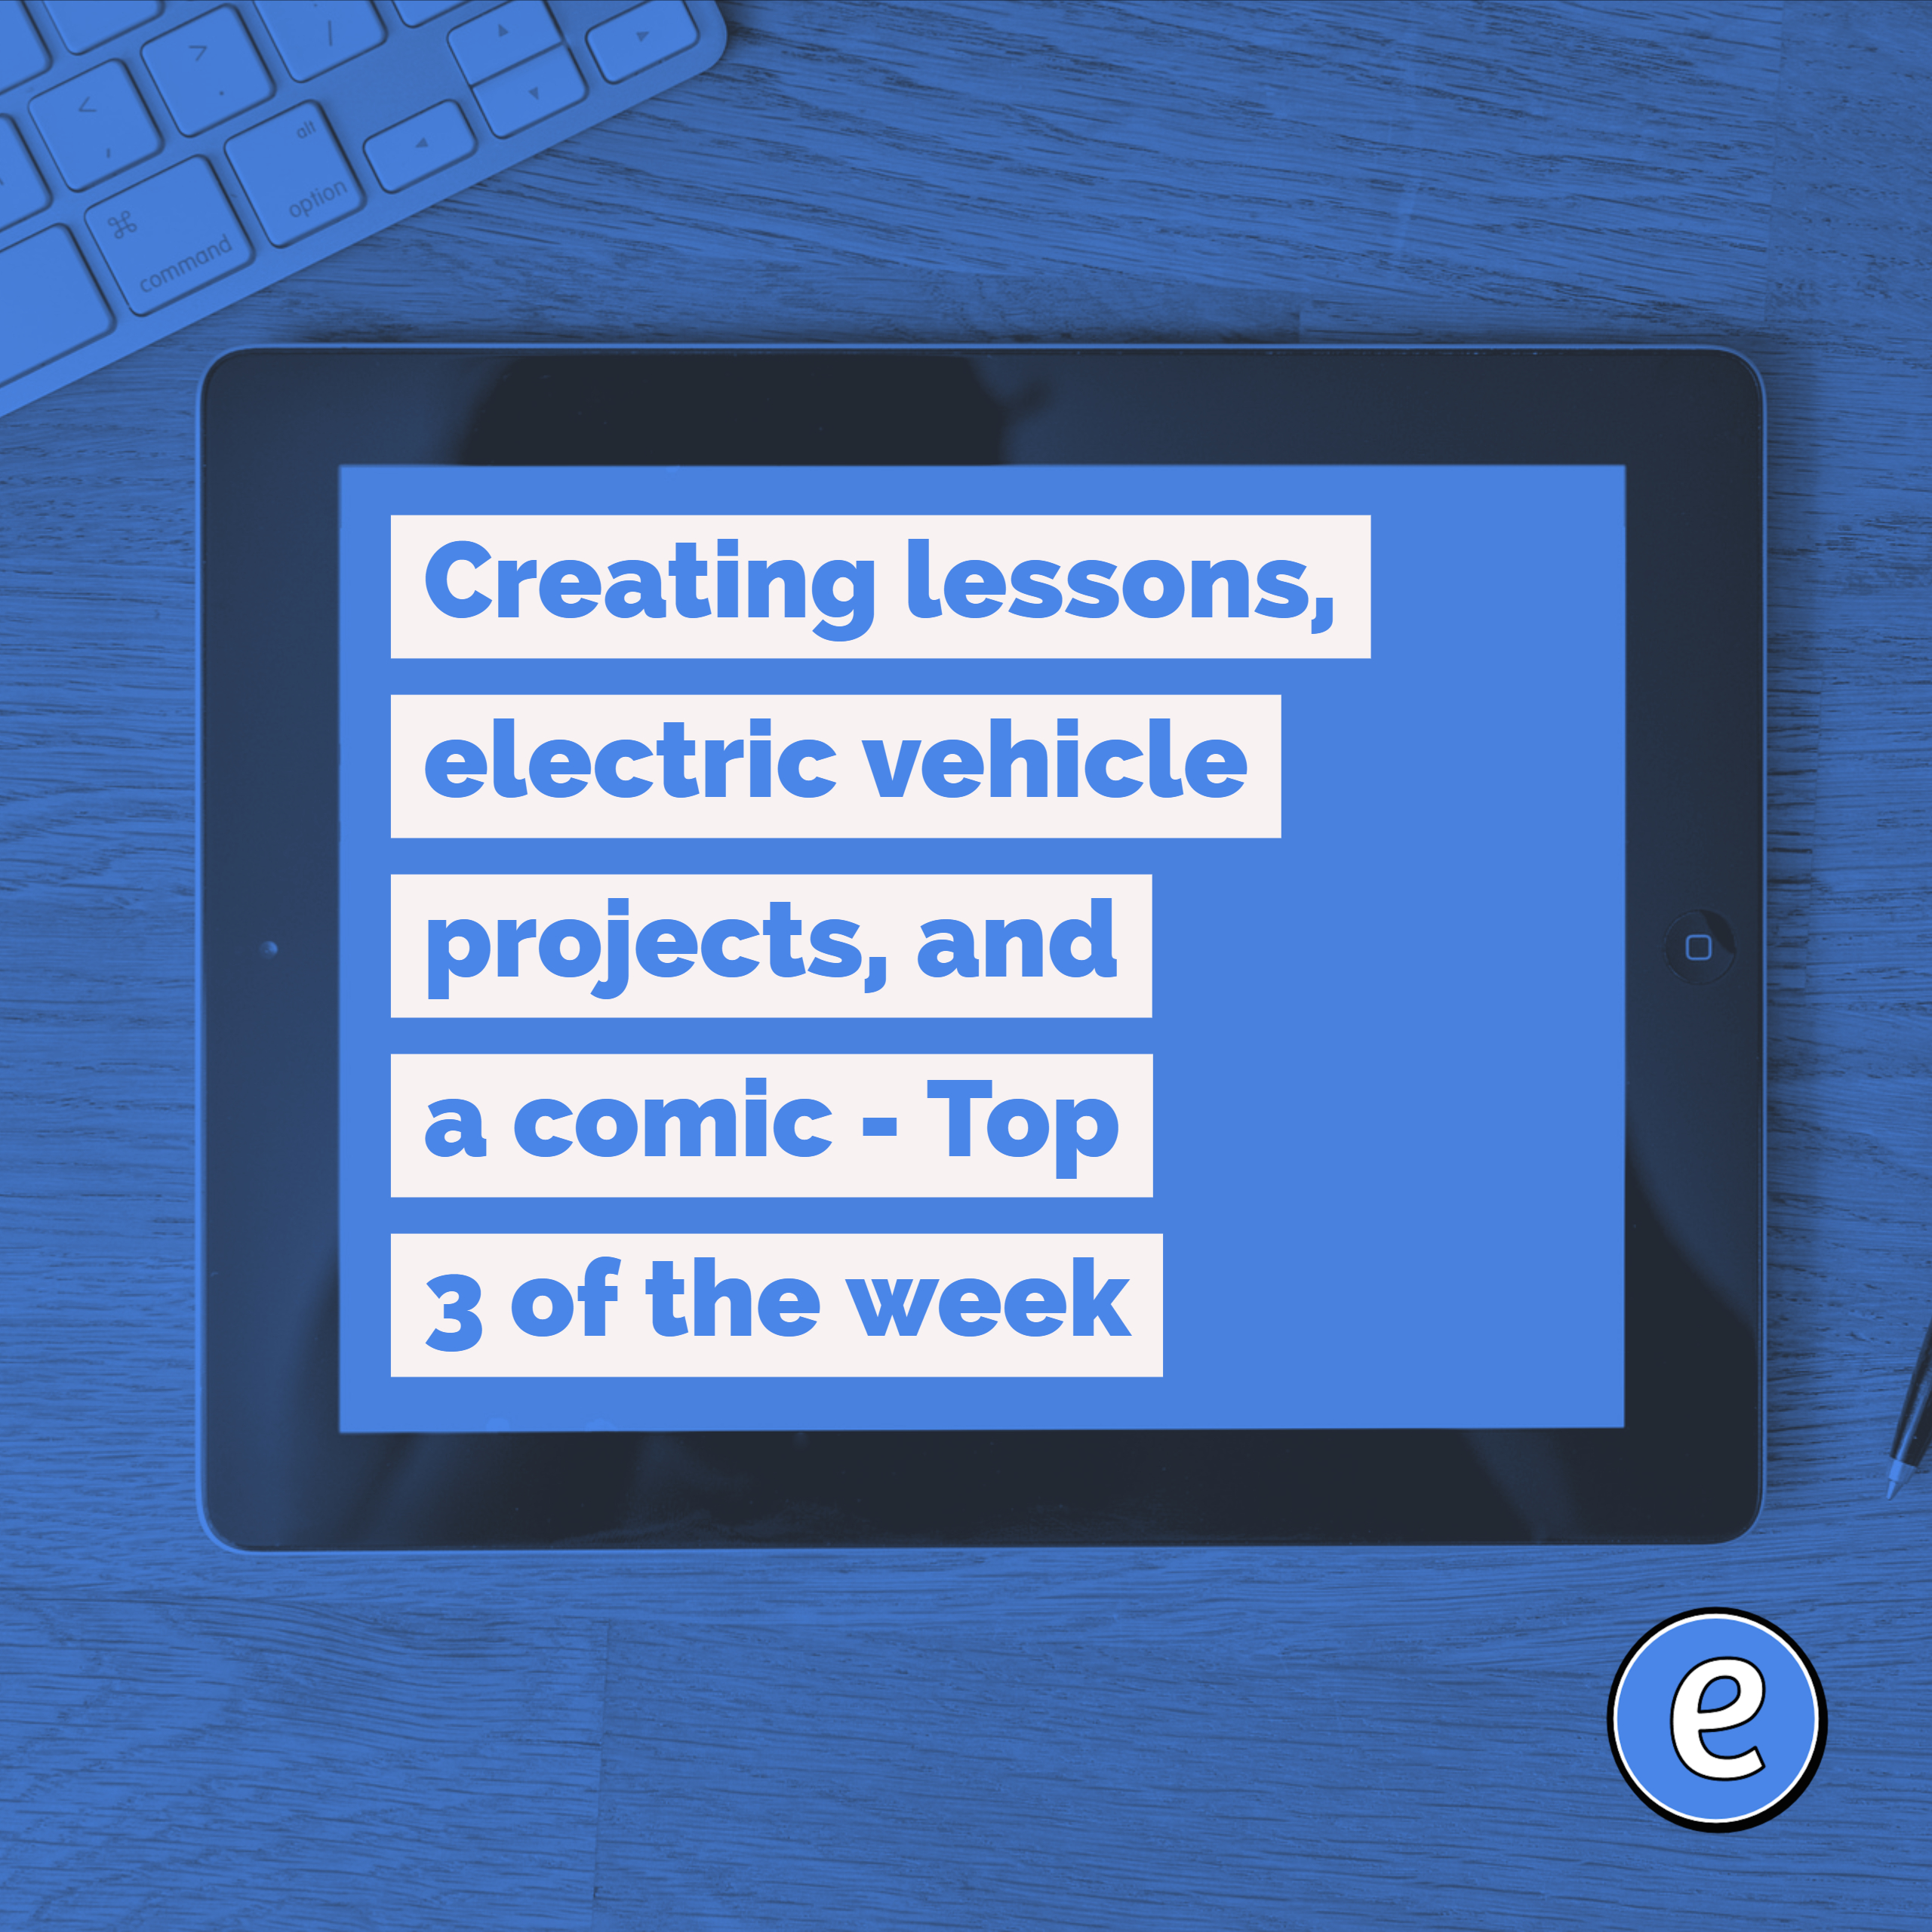 Creating lessons, electric vehicle projects, and a comic – Top 3 of the week